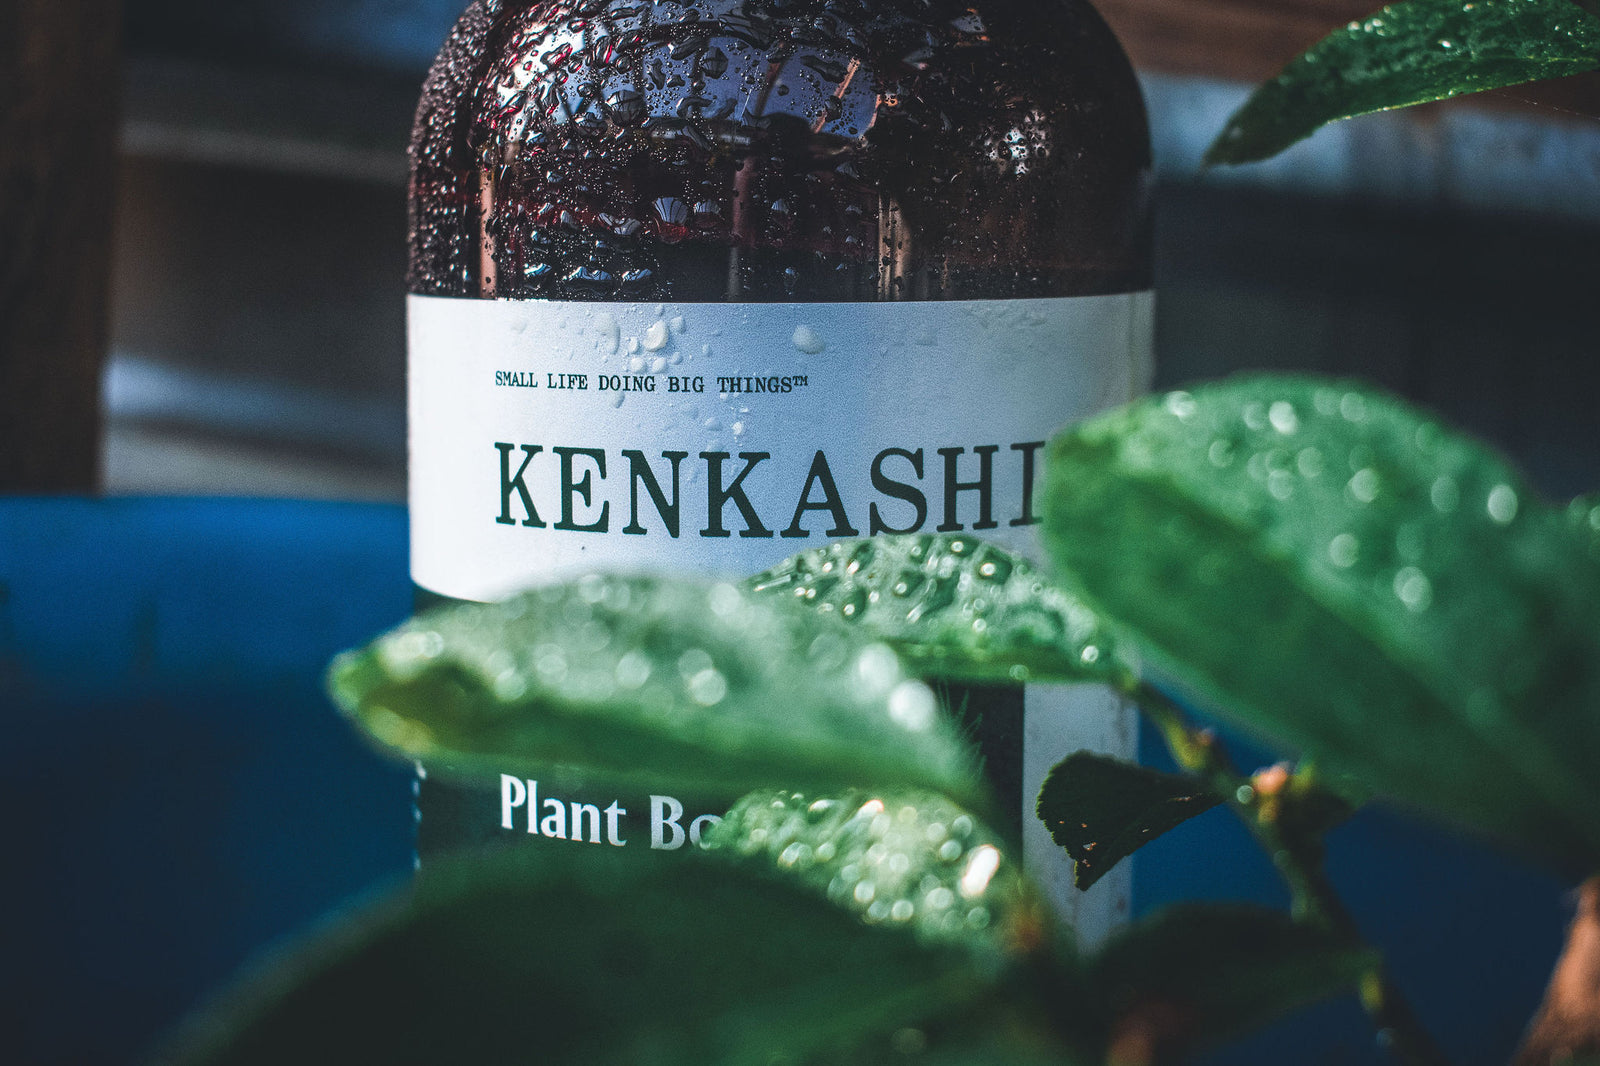 Kenkashi bottle label with water droplets in a potted plants with leaves